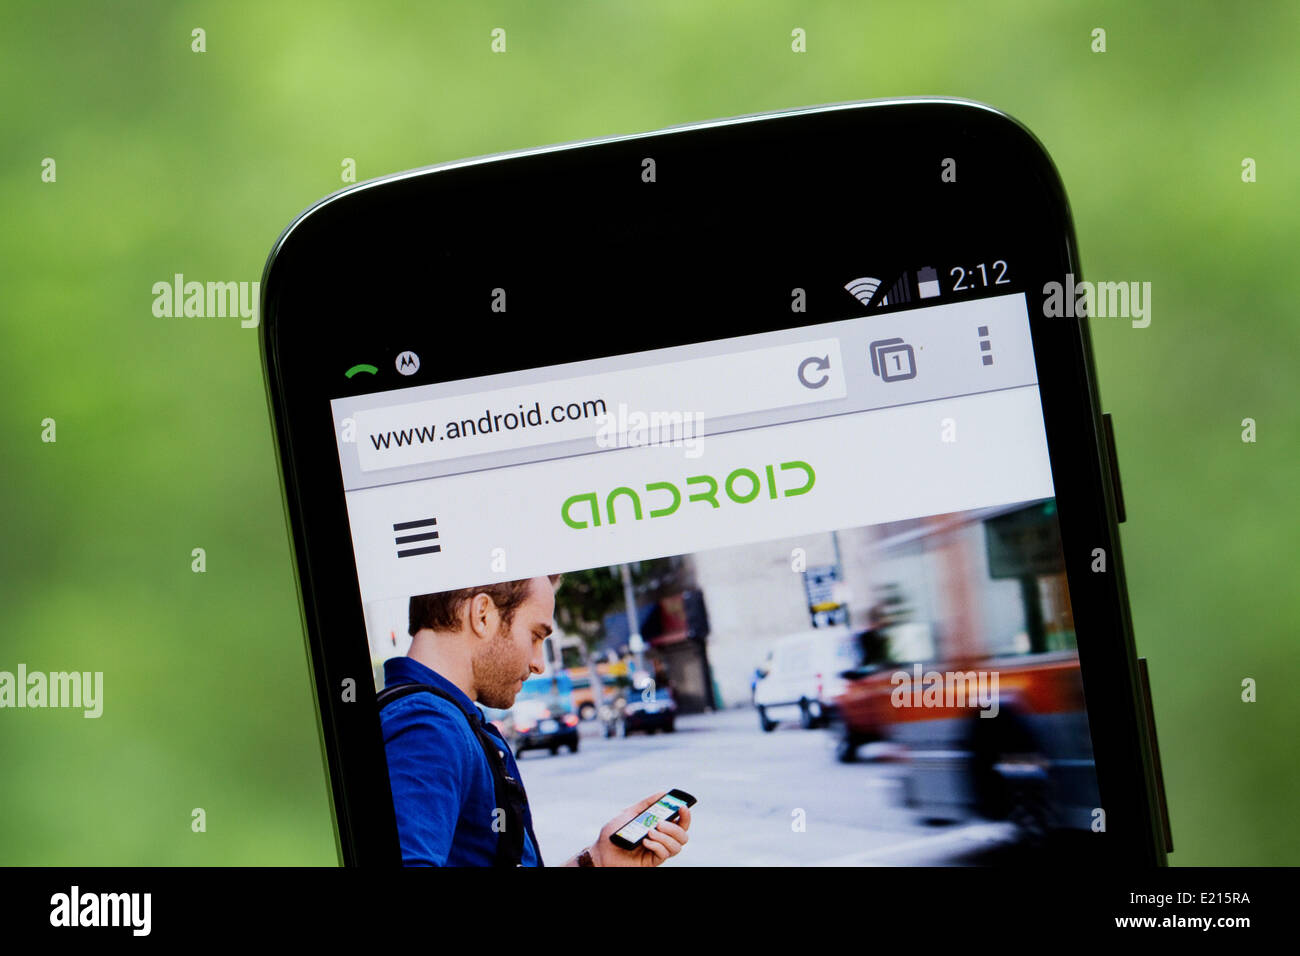 Android website displayed on the screen of a Motorola, Moto G cellphone, mobile phone. Stock Photo